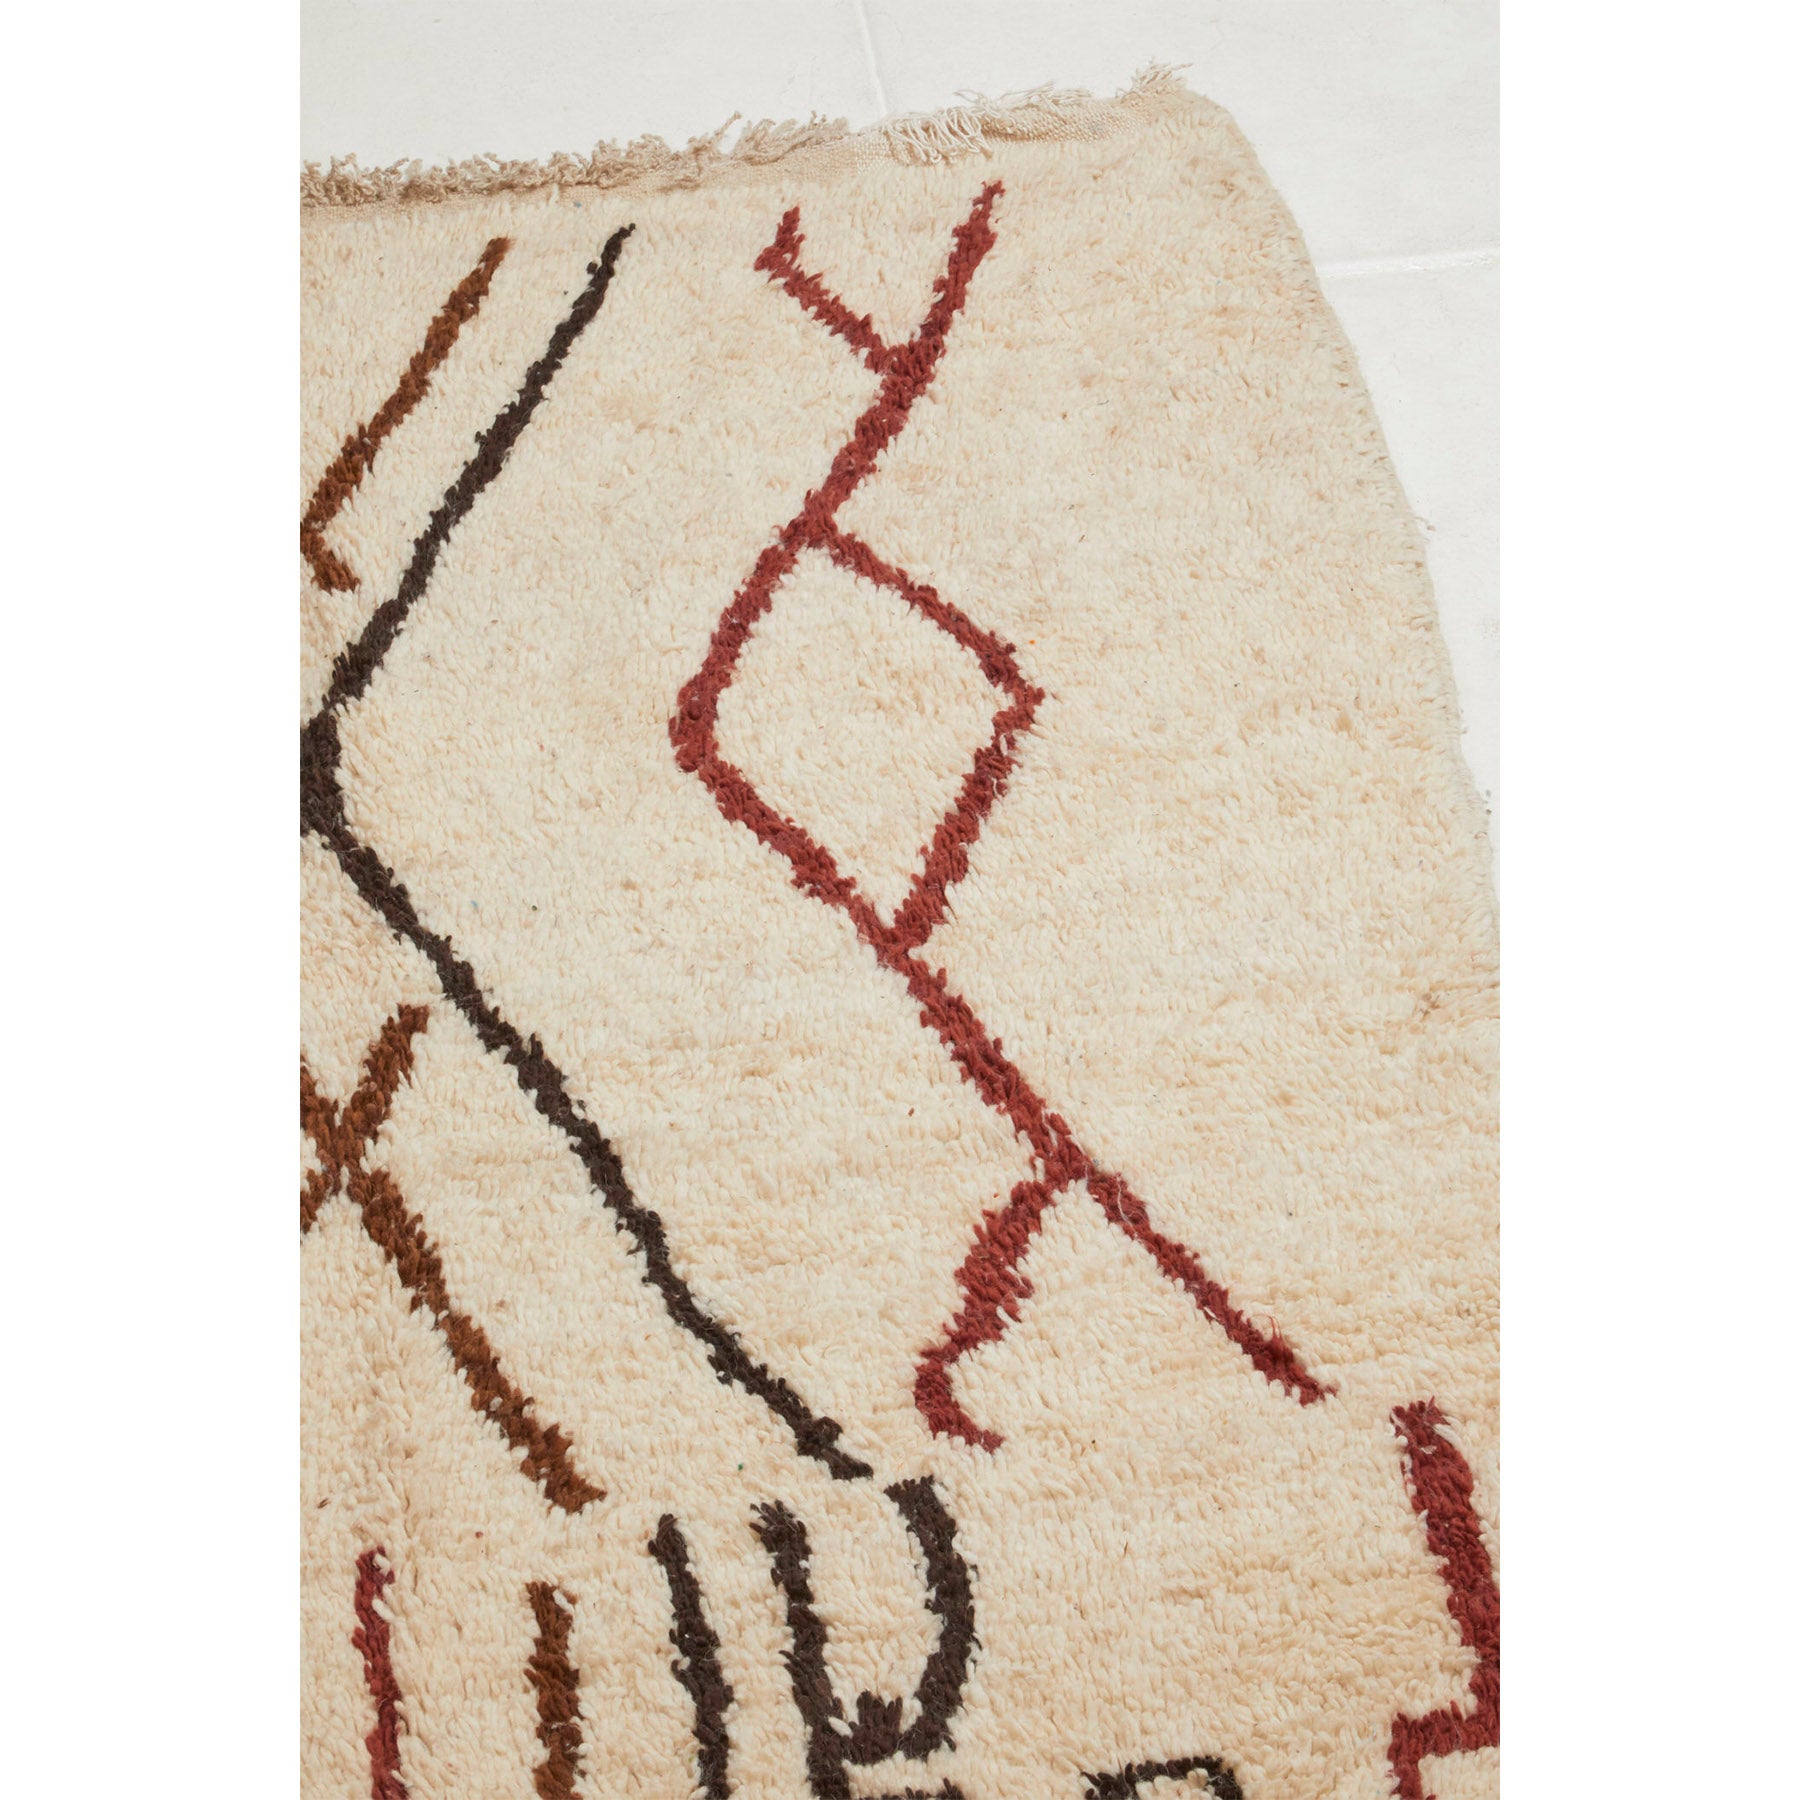 Neutral colored Moroccan berber carpet with intricate line work - Kantara | Moroccan Rugs